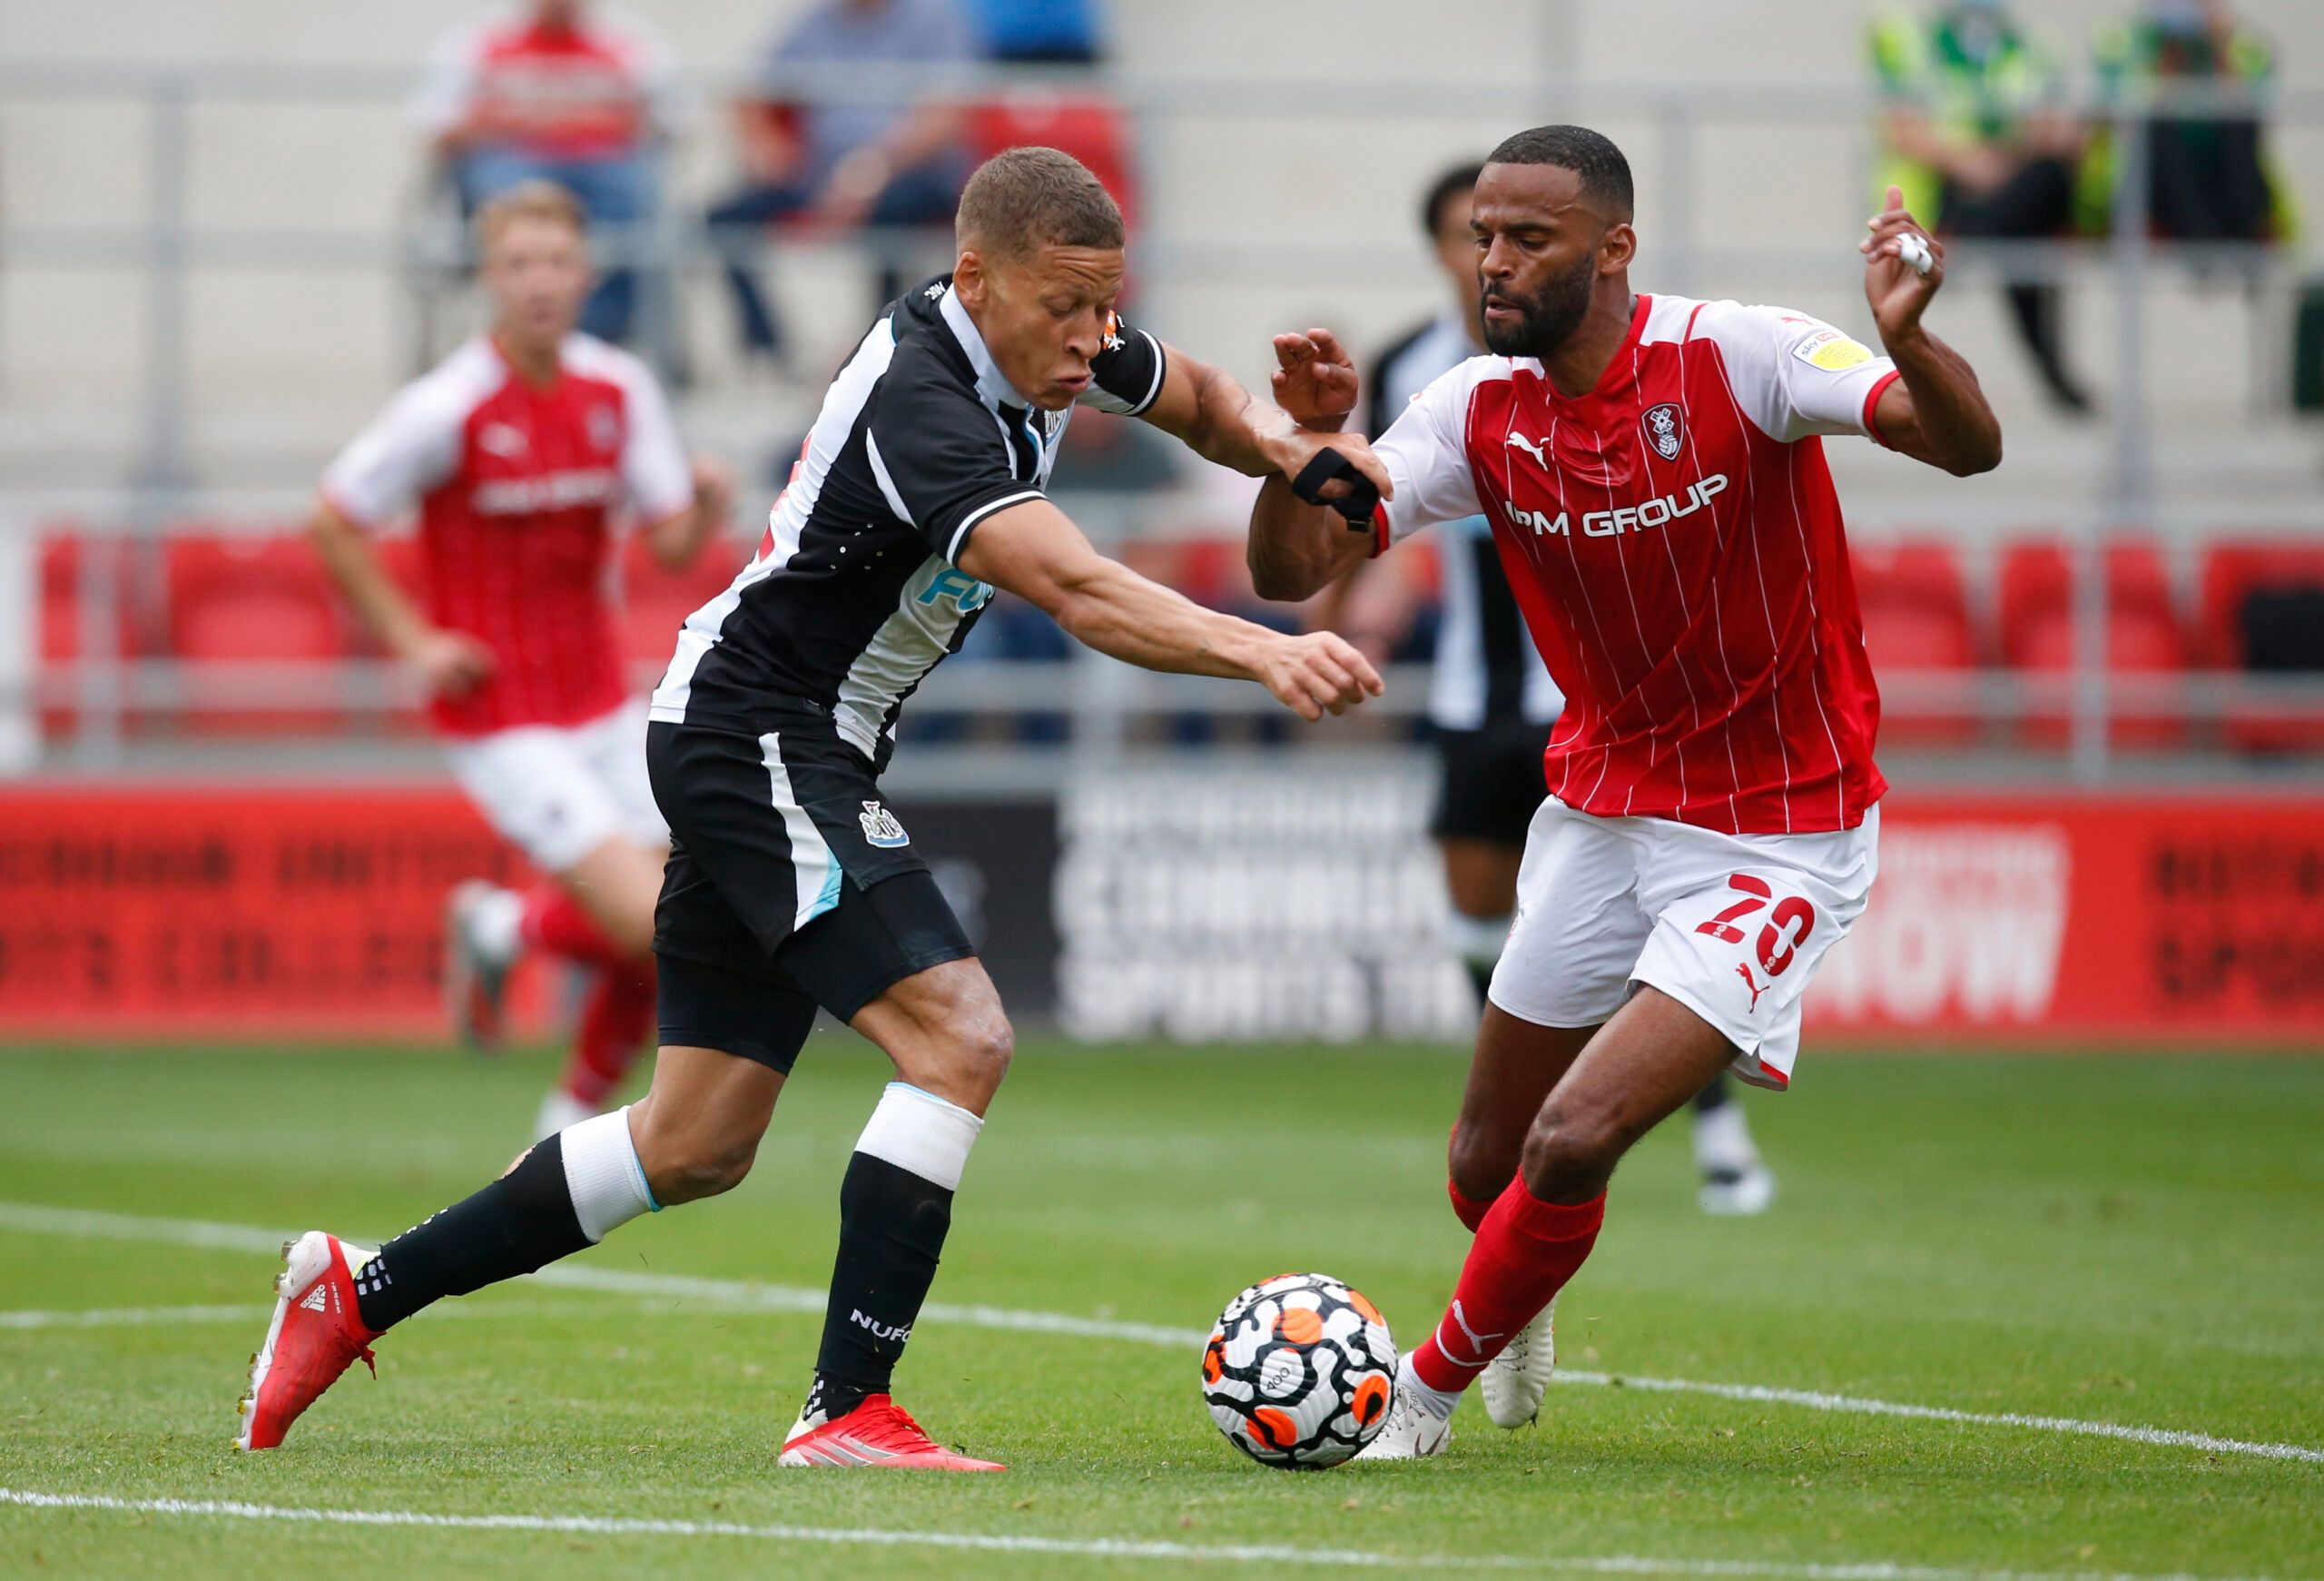 Soccer Football - Pre Season Friendly - Rotherham United v Newcastle United - AESSEAL New York Stadium, Rotherham, Britain - July 27, 2021 Newcastle United's Dwight Gayle in action with Rotherham United's Michael Ihiekwe Action Images via Reuters/Ed Sykes